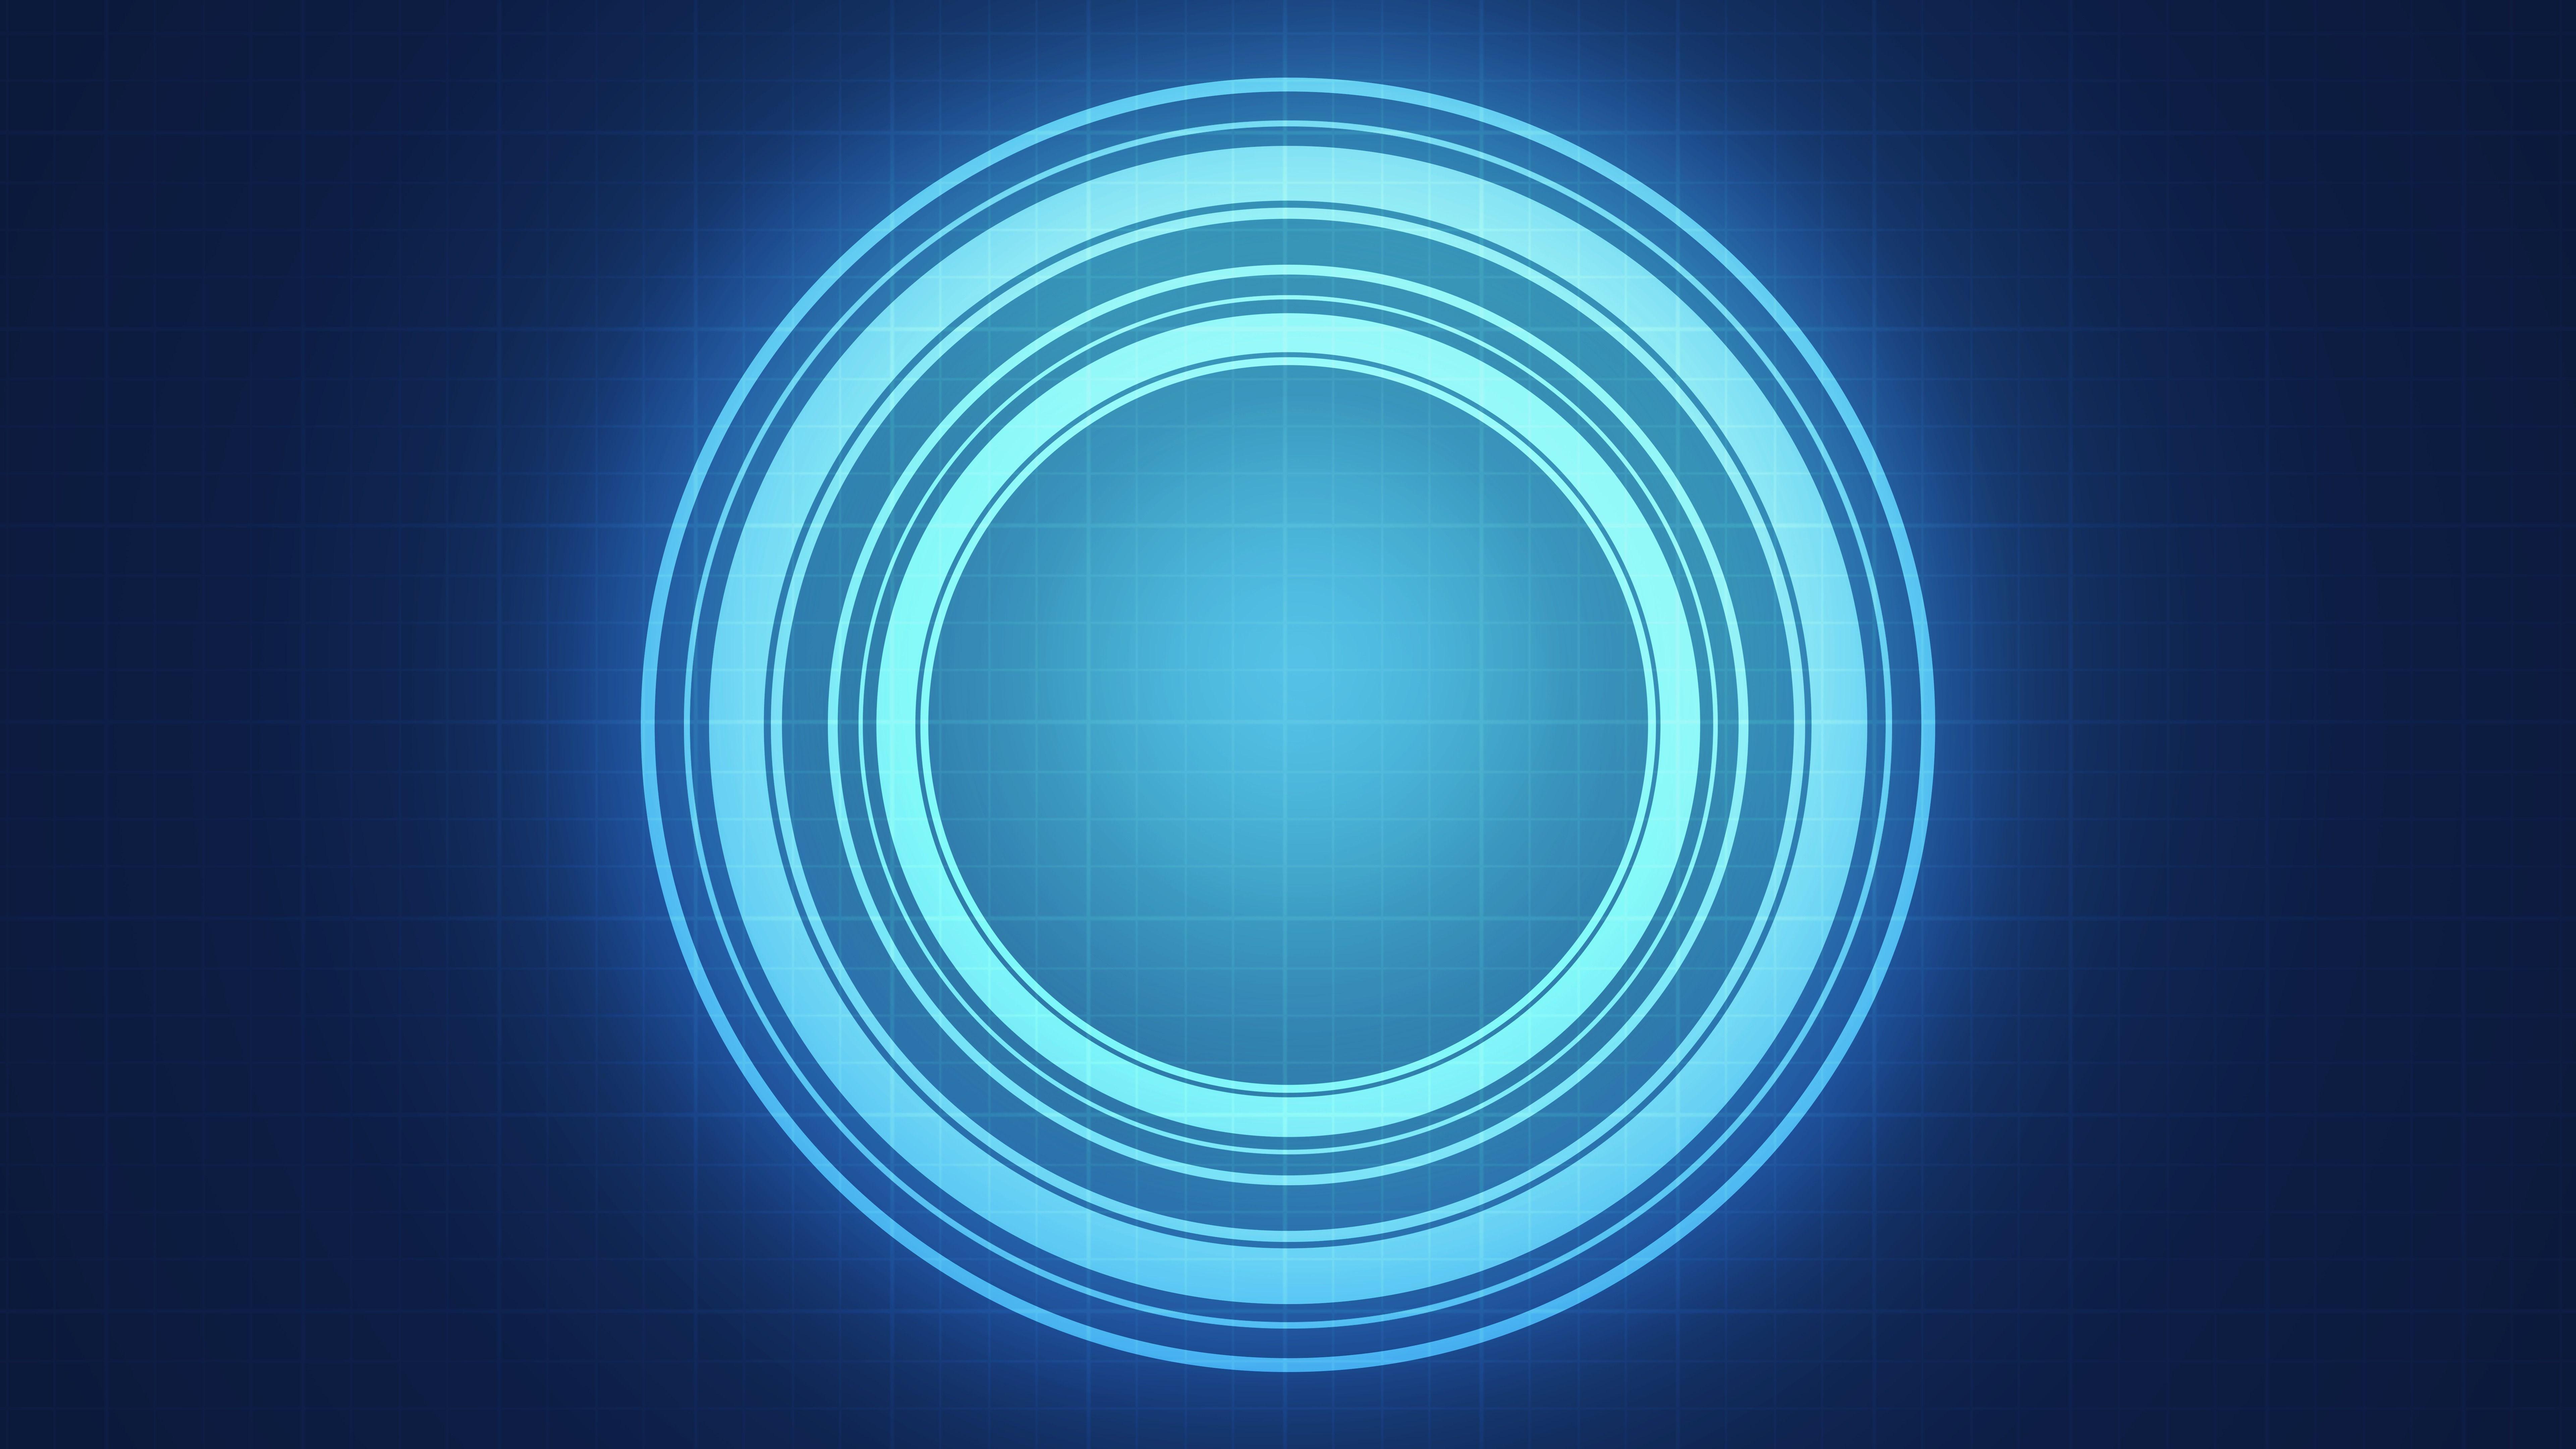 Abstract Circle Wallpapers - Top Free Abstract Circle Backgrounds